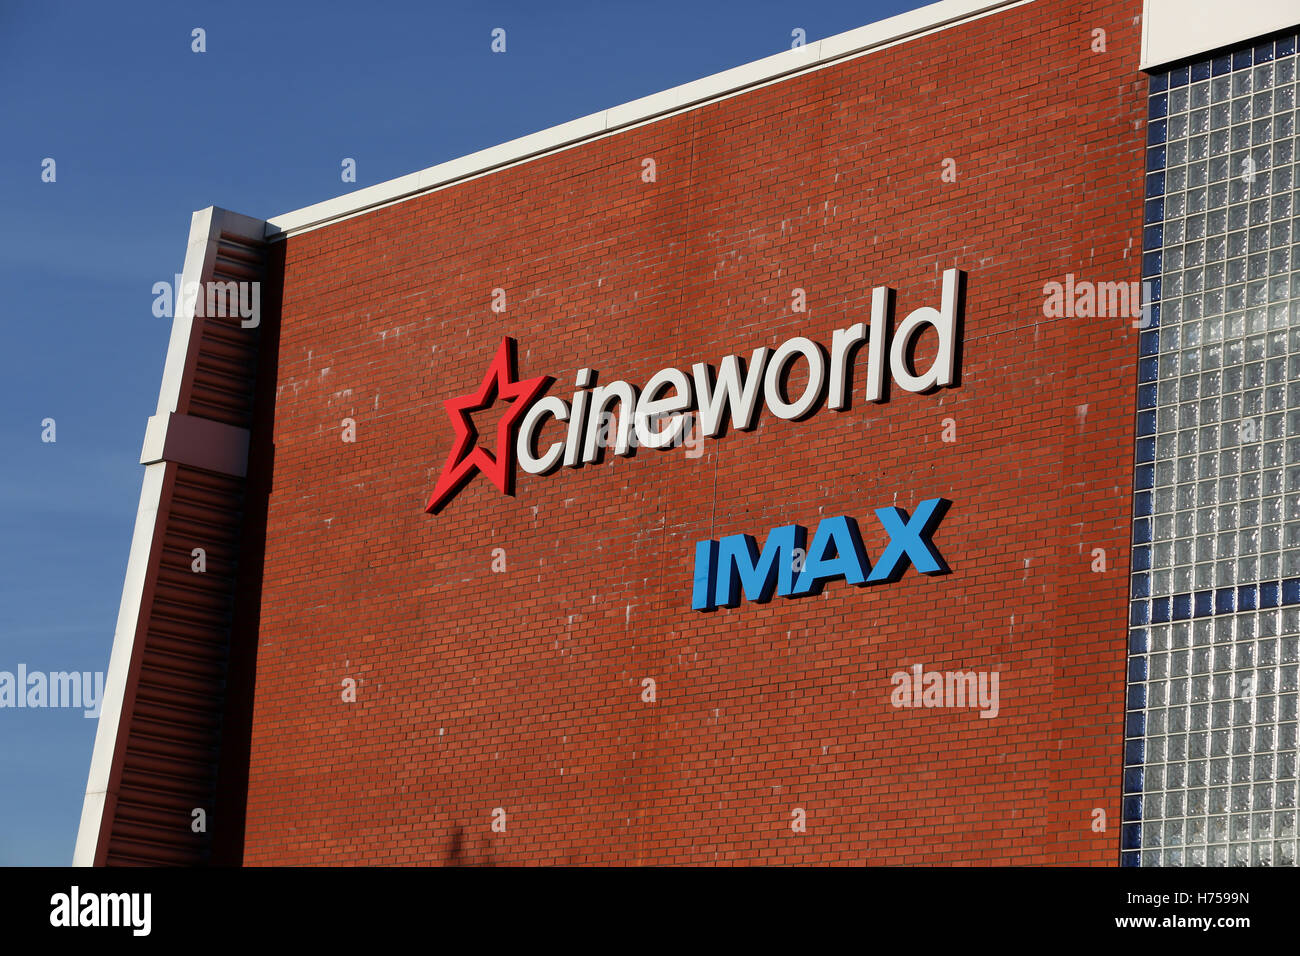 External views of the Cineworld IMAX Cinema in Chichester, West Sussex, UK. Stock Photo